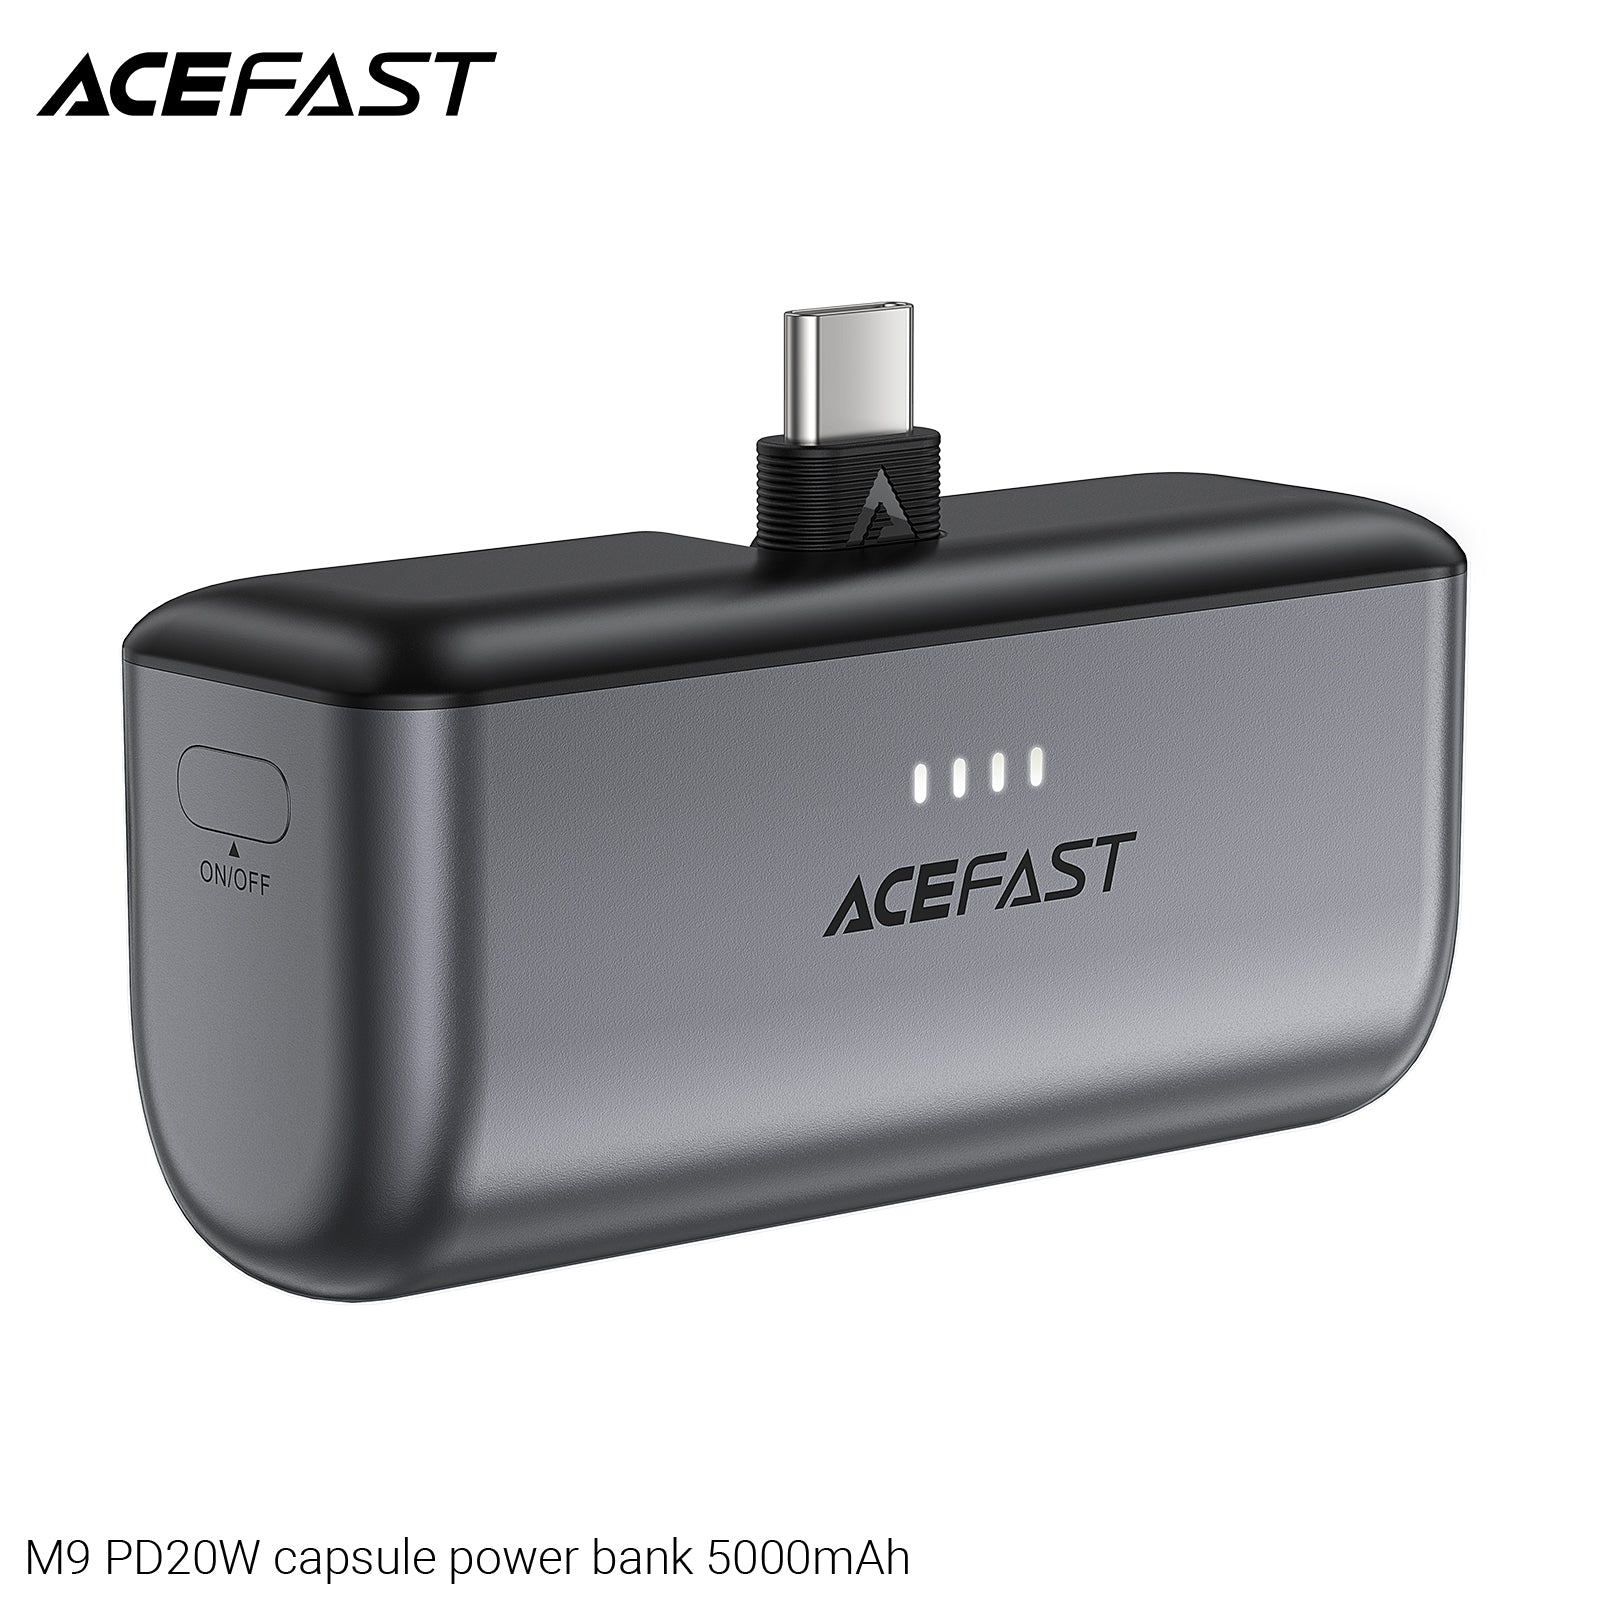 ACEFAST M9-5000 PD20W Capsule Power Bank